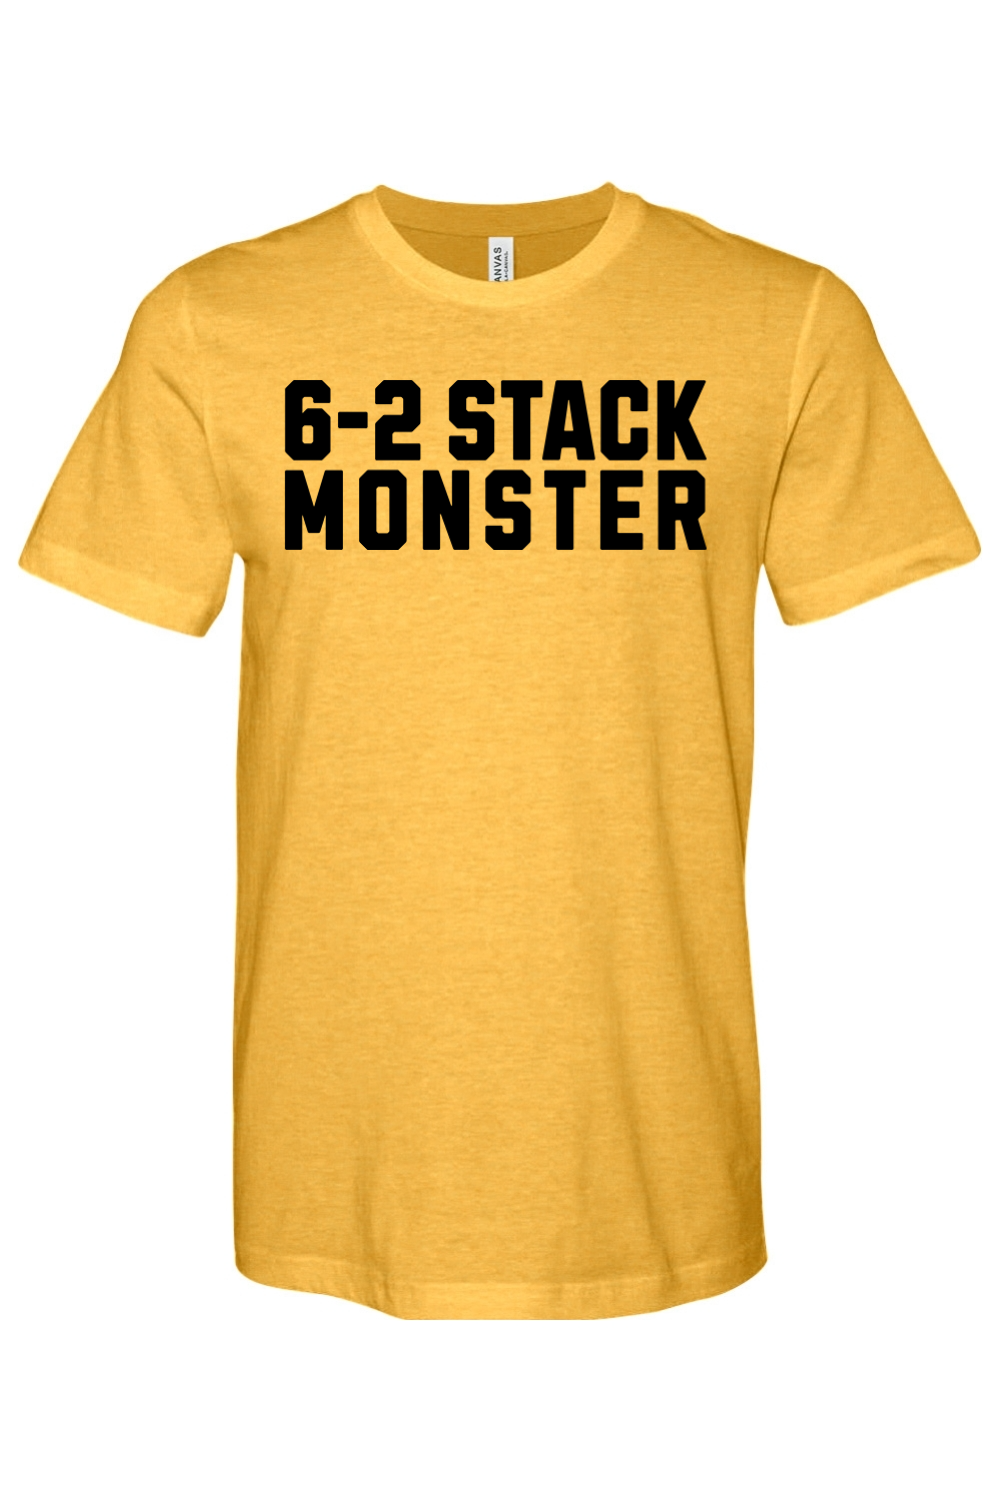 6-2 Stack Monster (All The Right Moves) - Yinzylvania